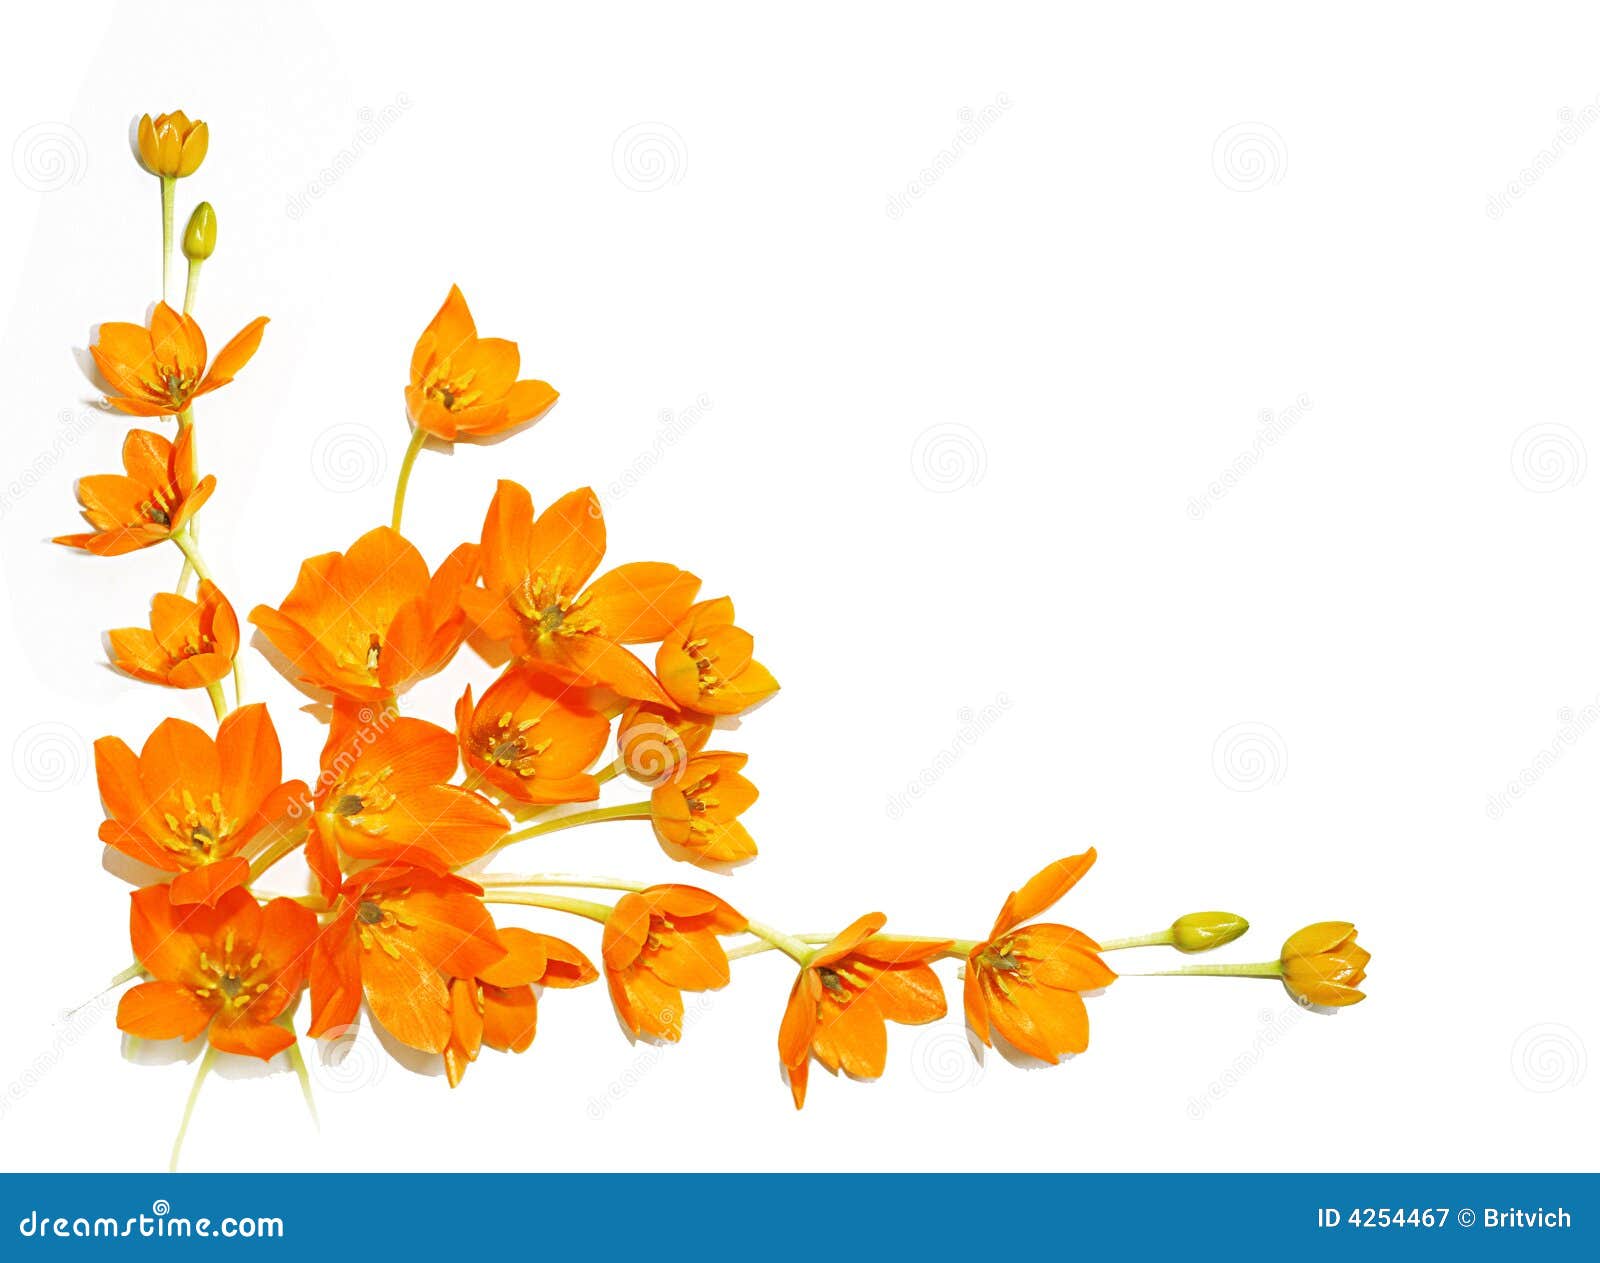 Isolated Yellow Flowers Royalty Free Stock Photography - Image: 4254467